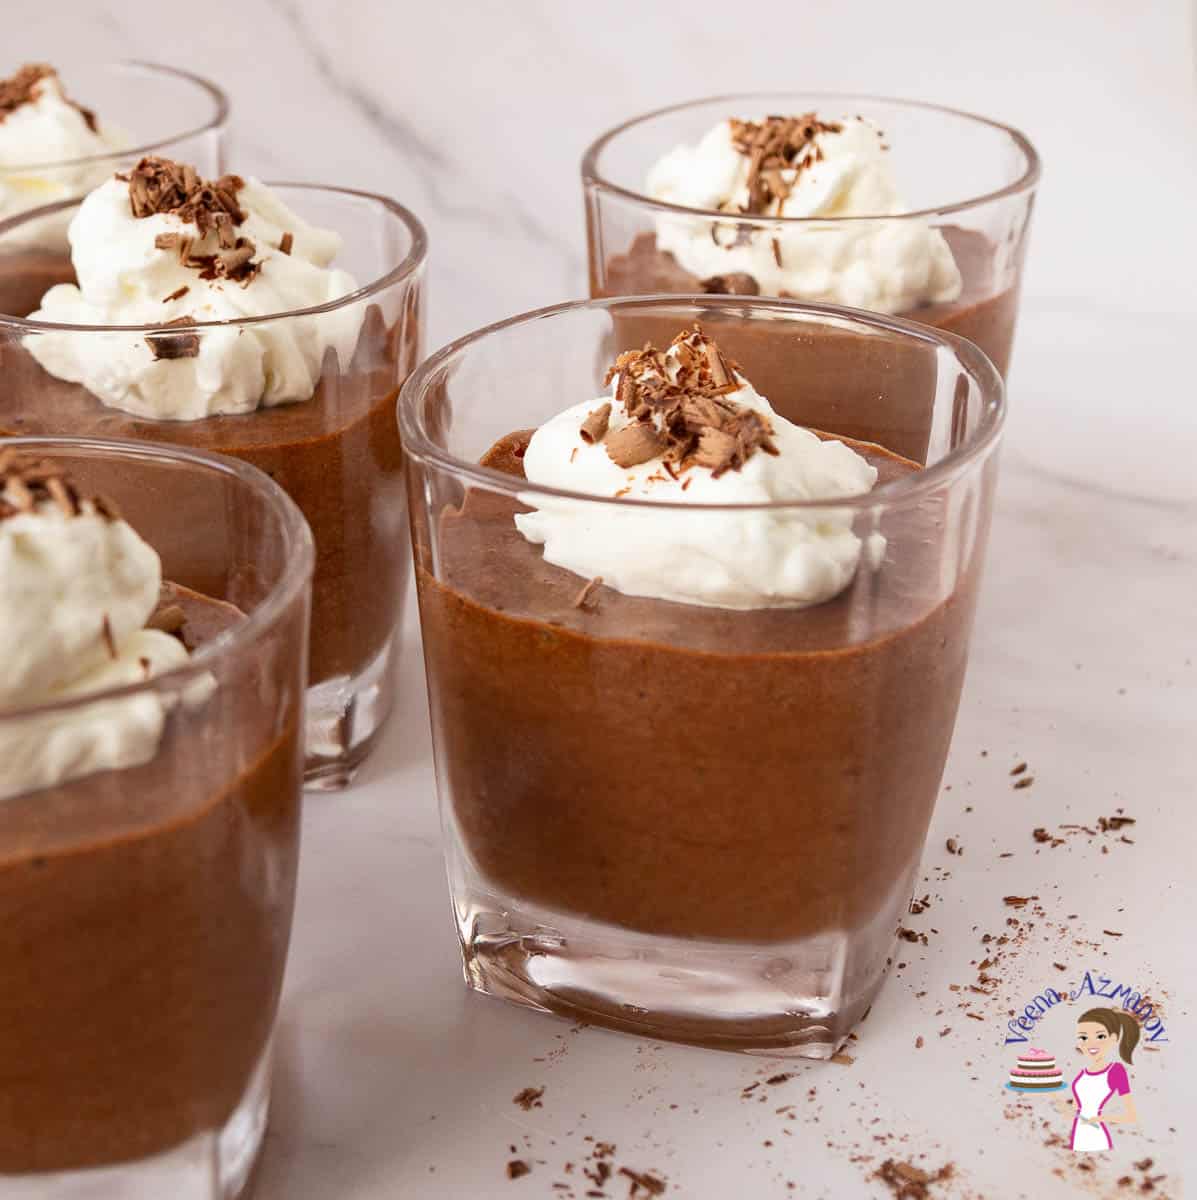 A glass with mousse and cream